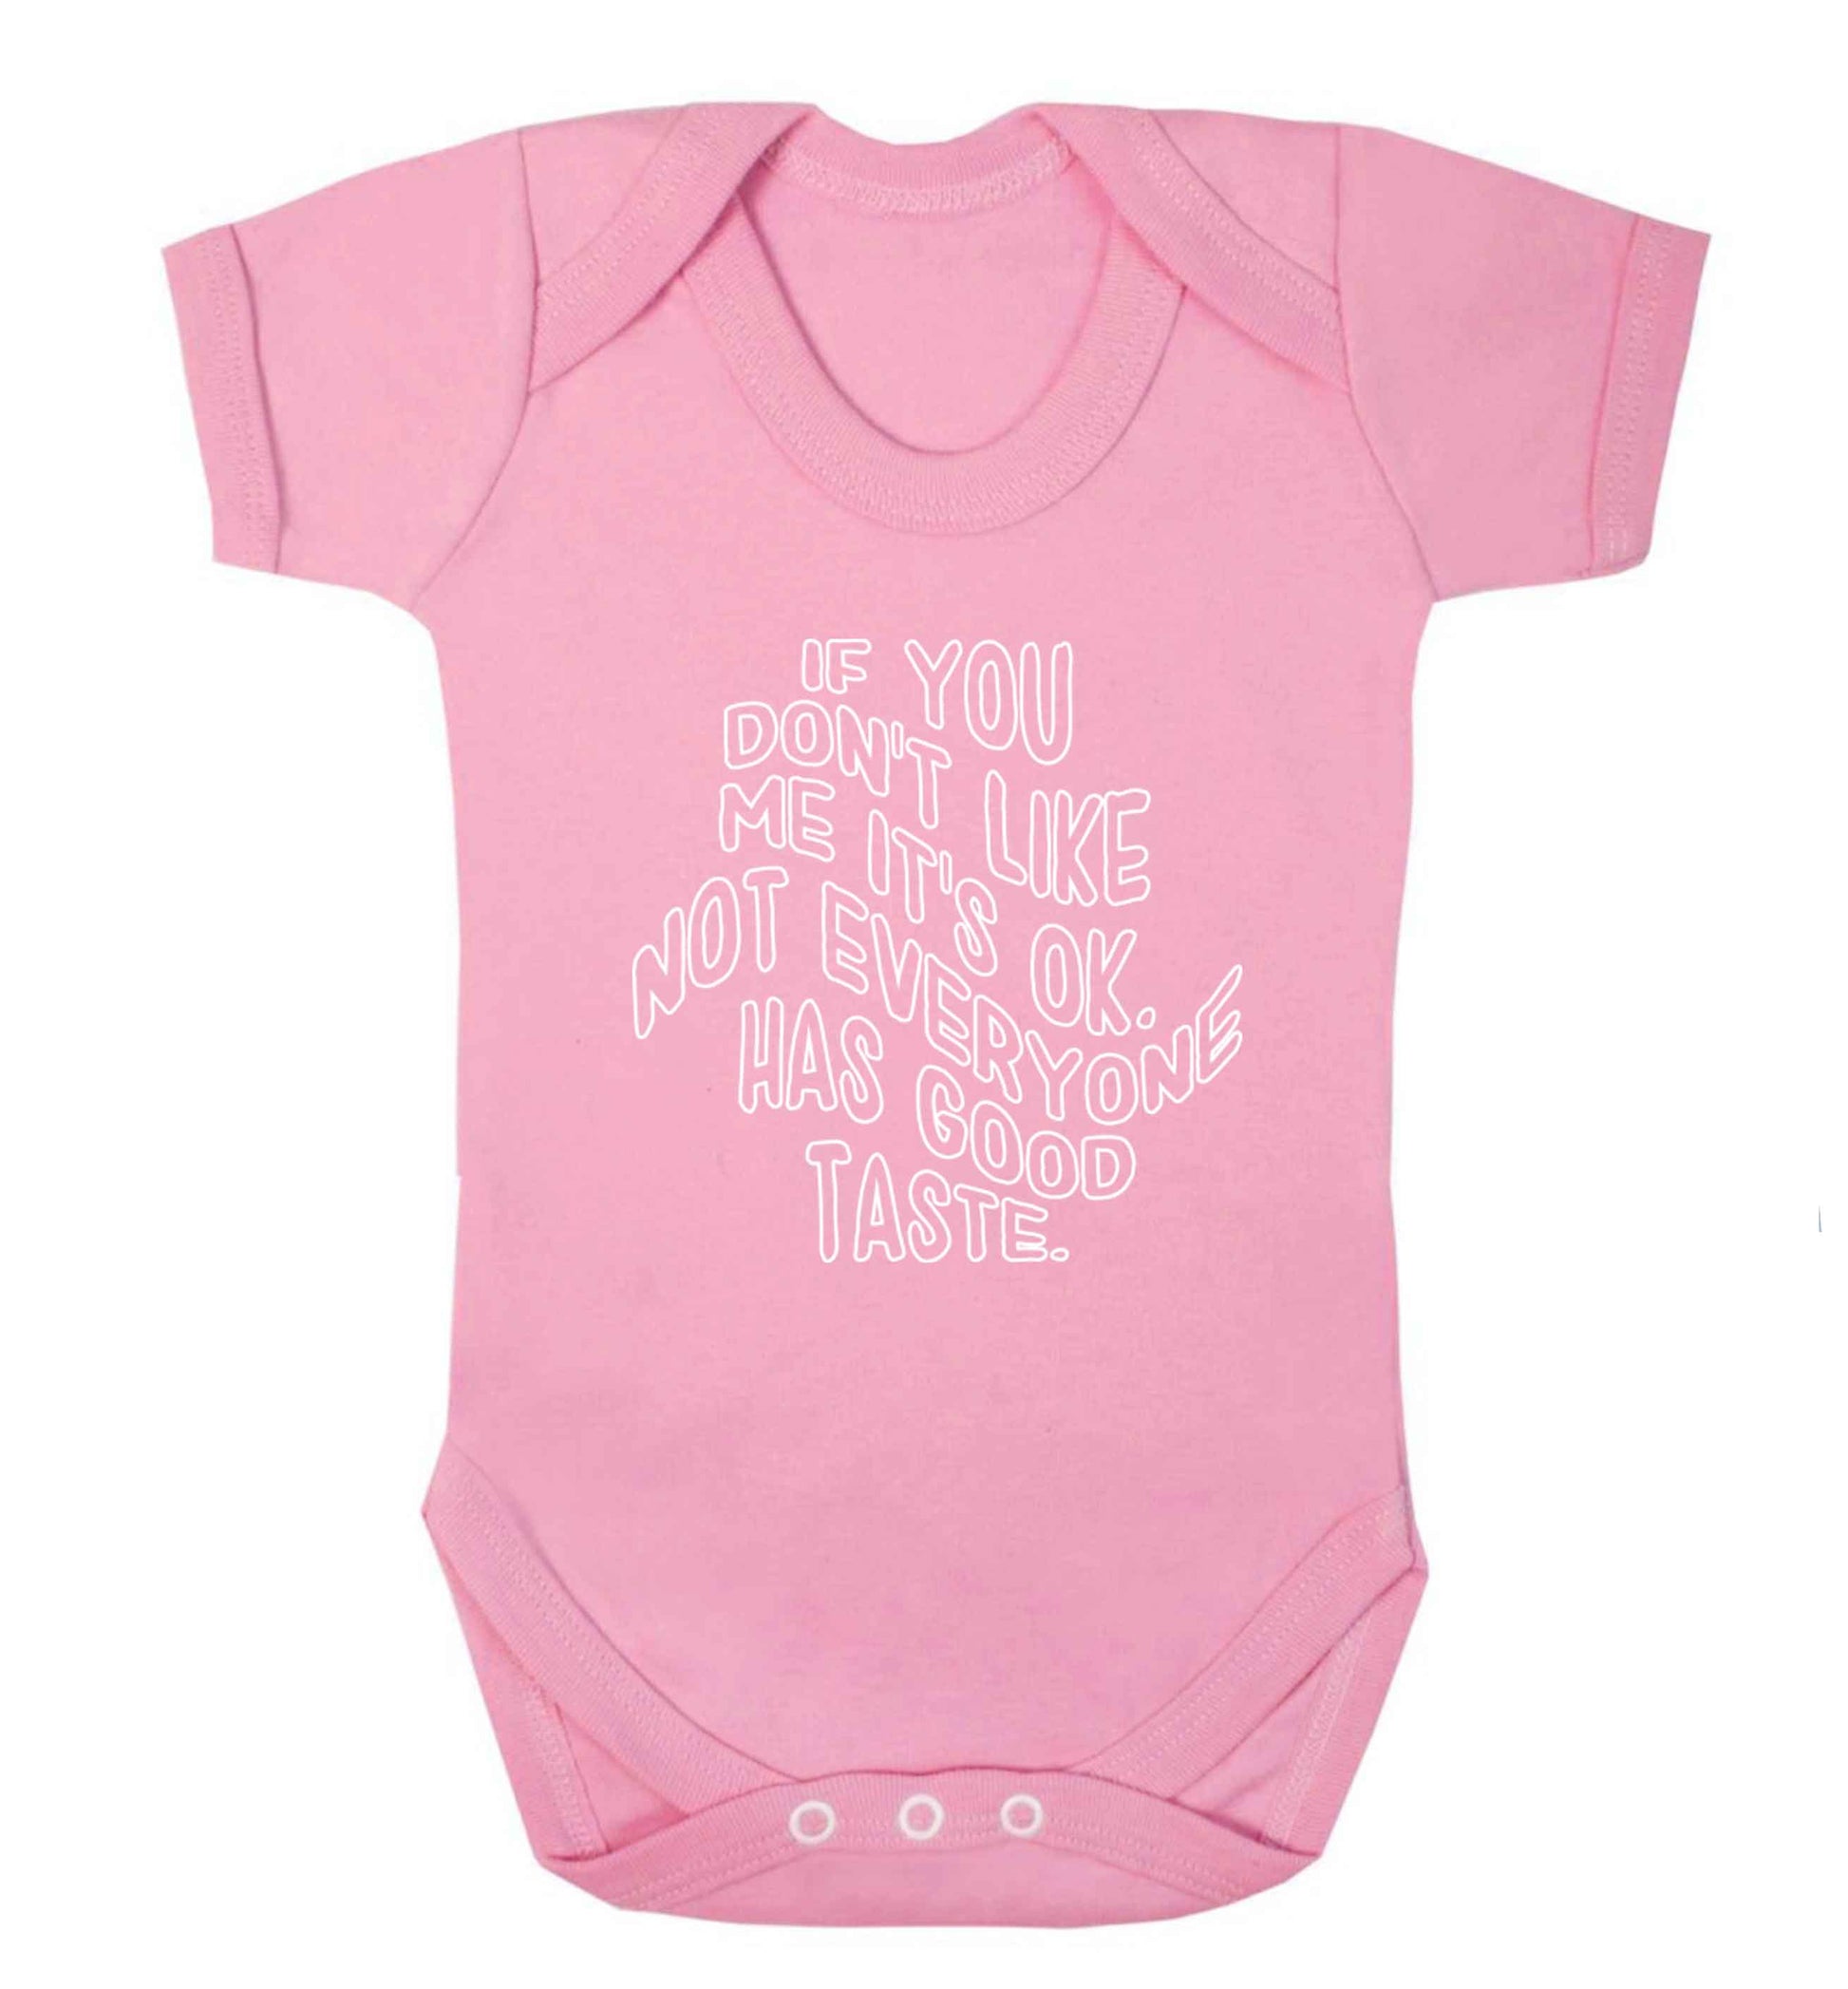 If you don't like me it's ok not everyone has good taste baby vest pale pink 18-24 months